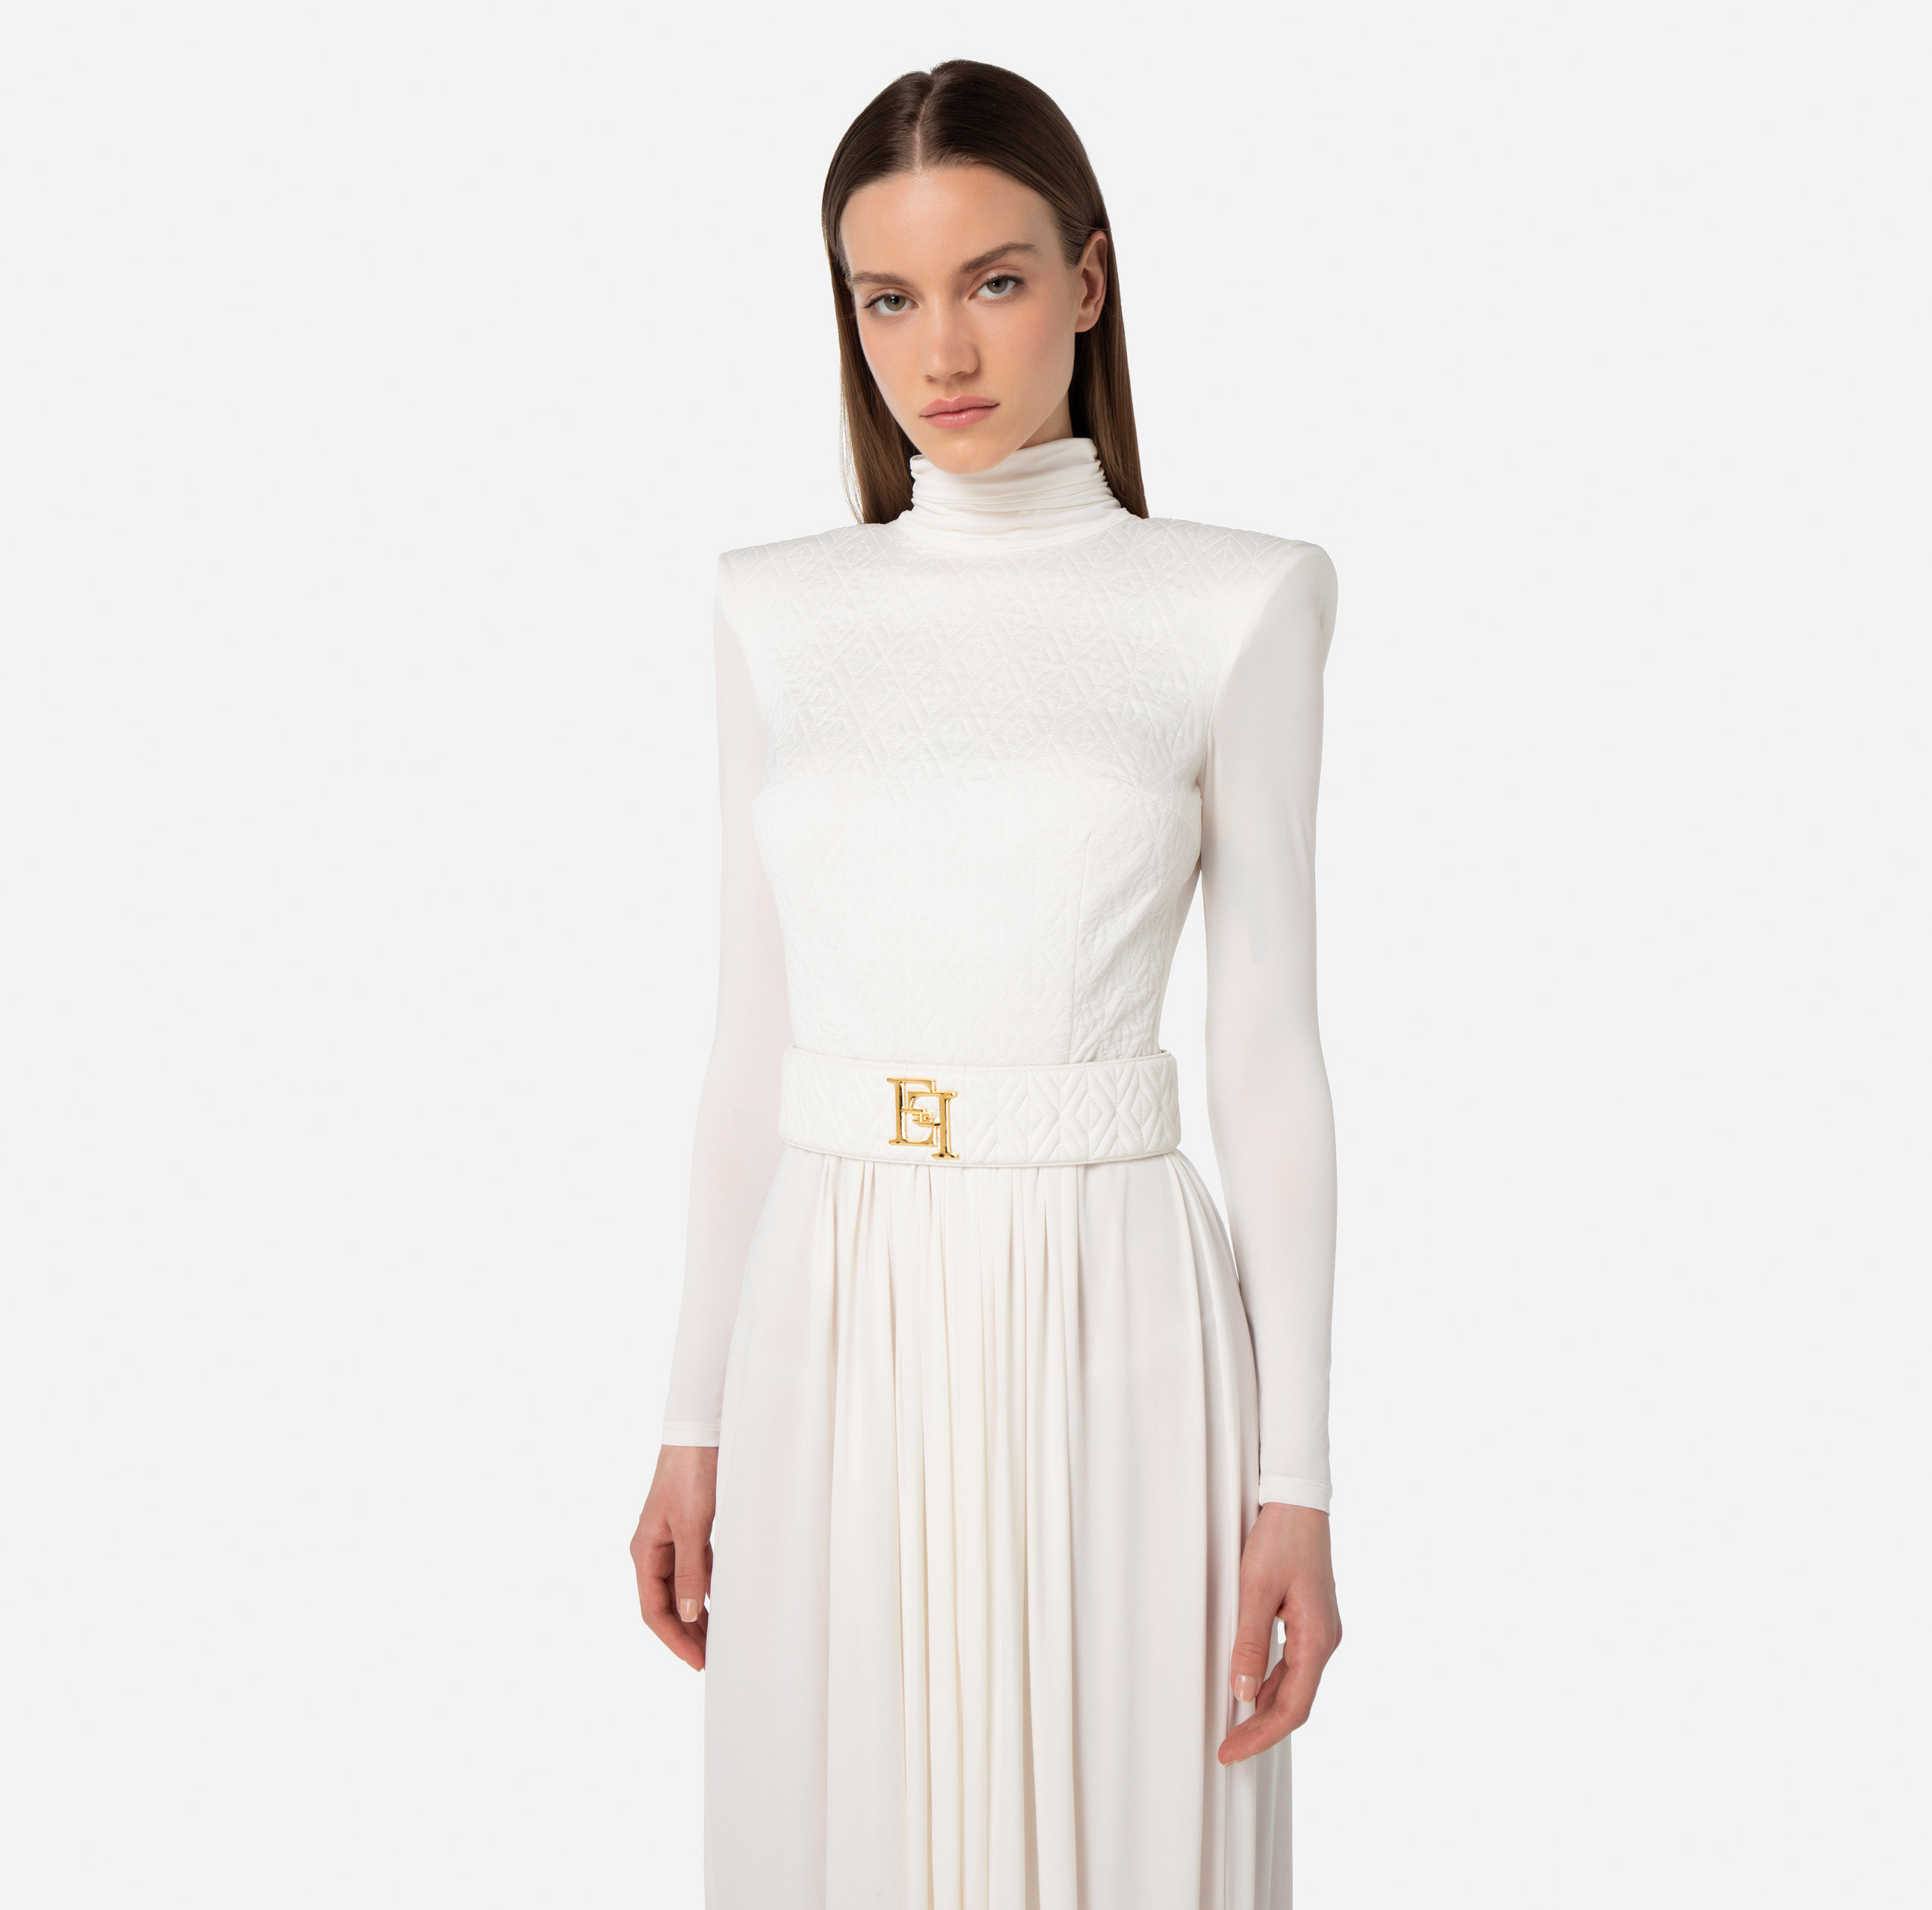 Red Carpet dress in jersey with embossed embroidery - Elisabetta Franchi